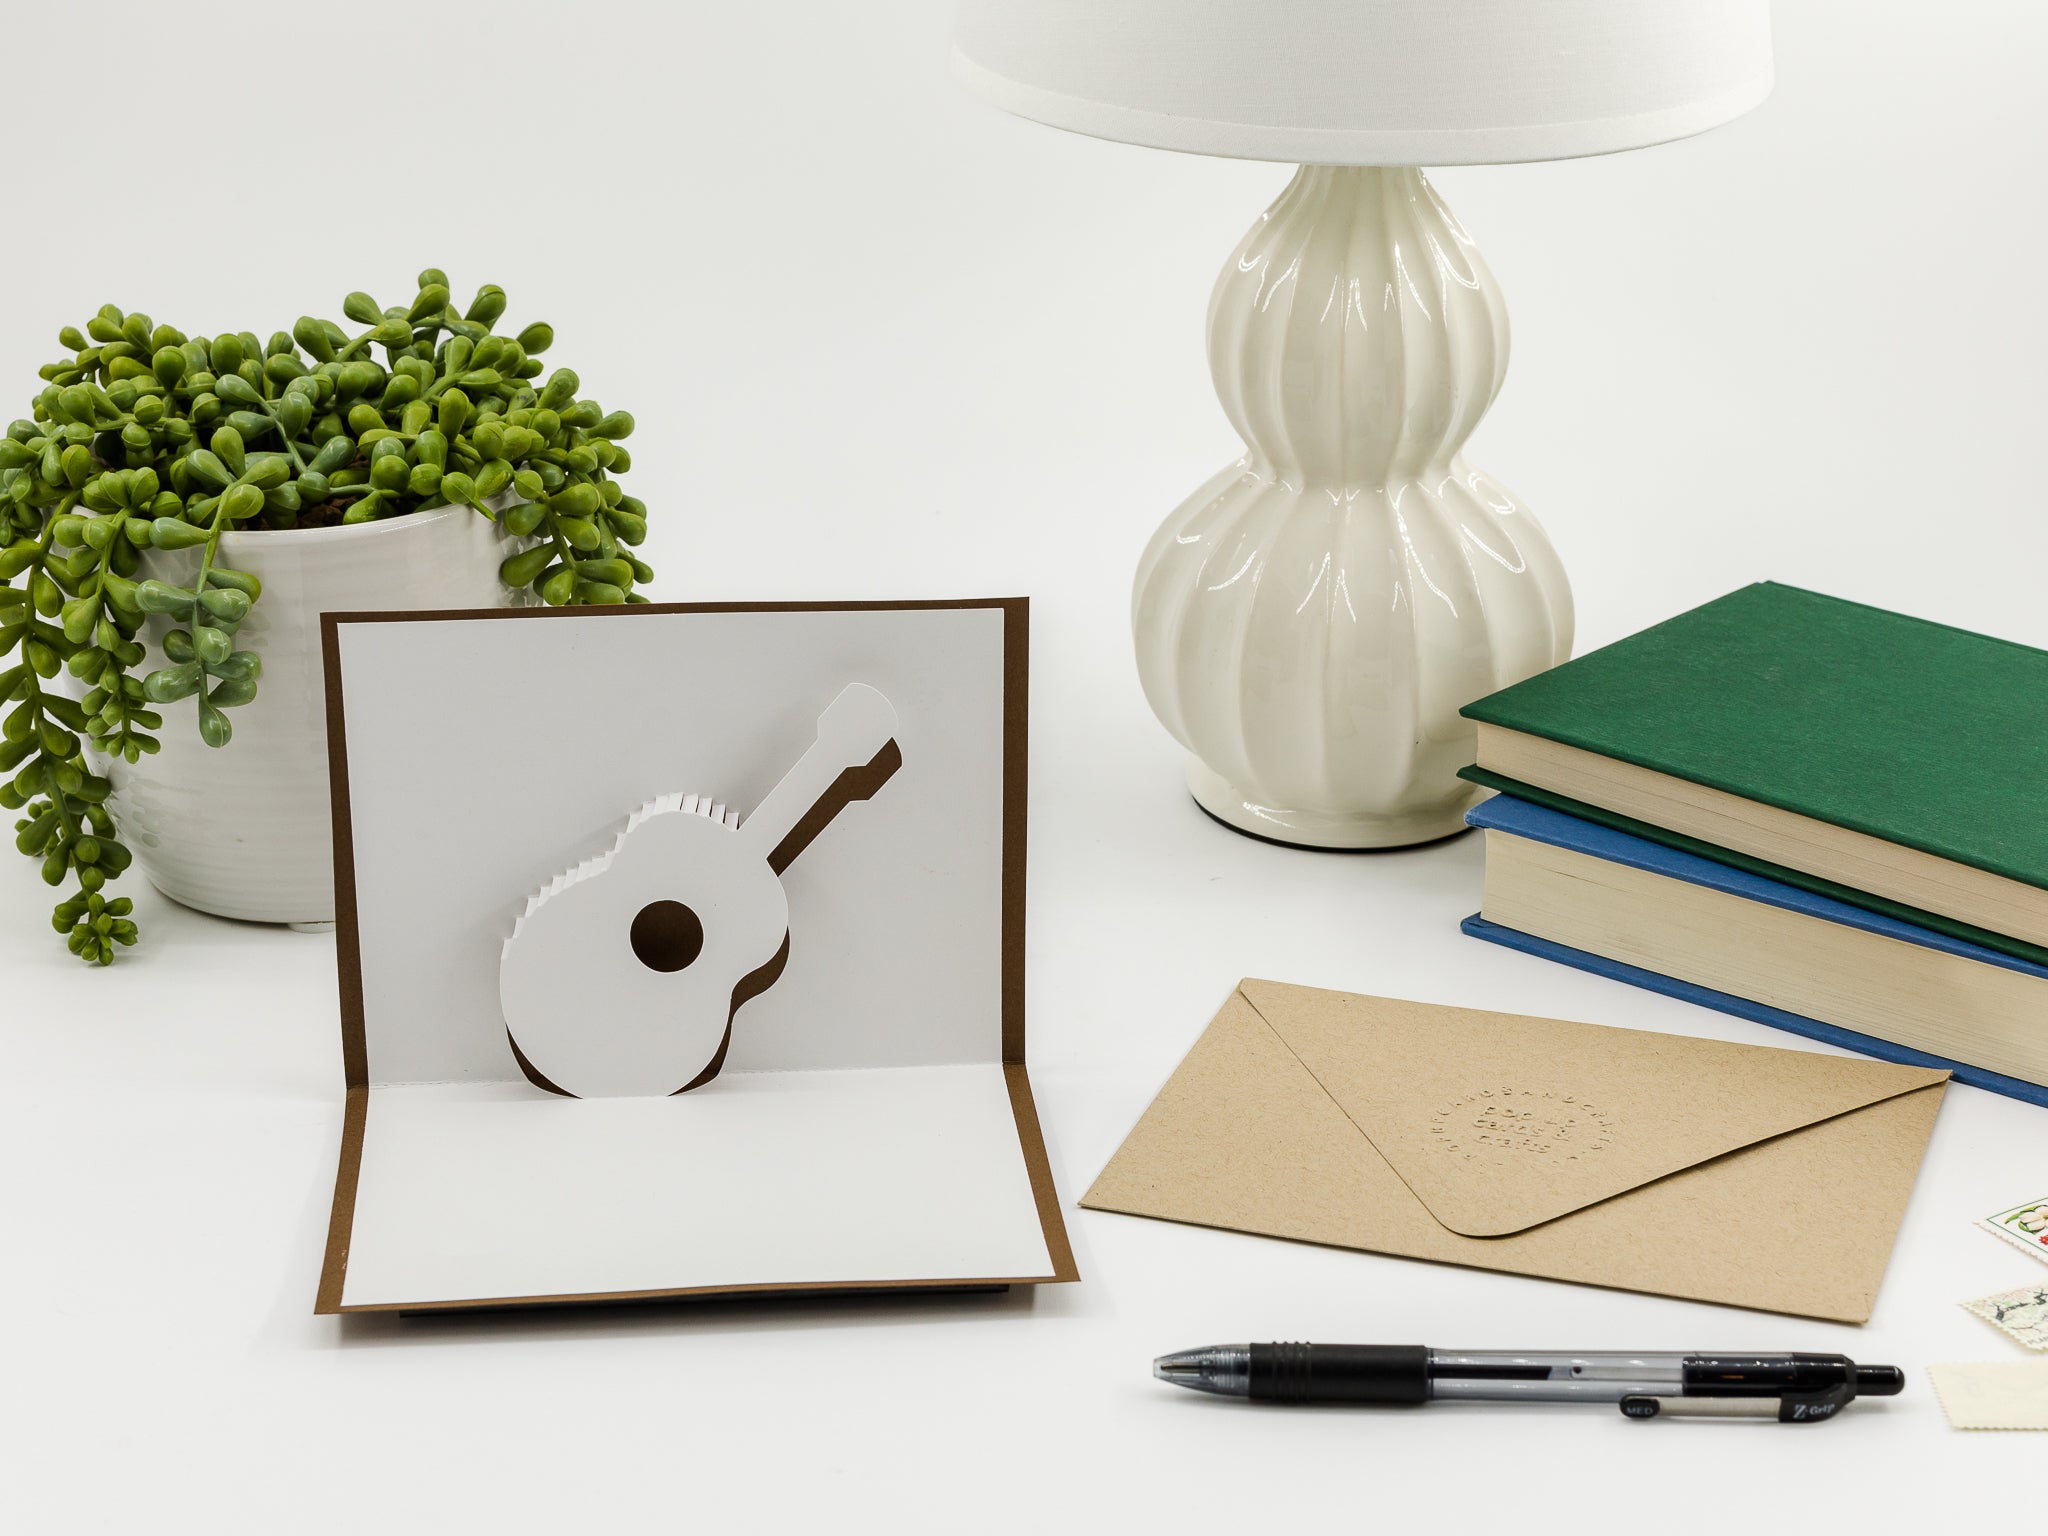 Acoustic Guitar Pop Up 3D Greeting Card